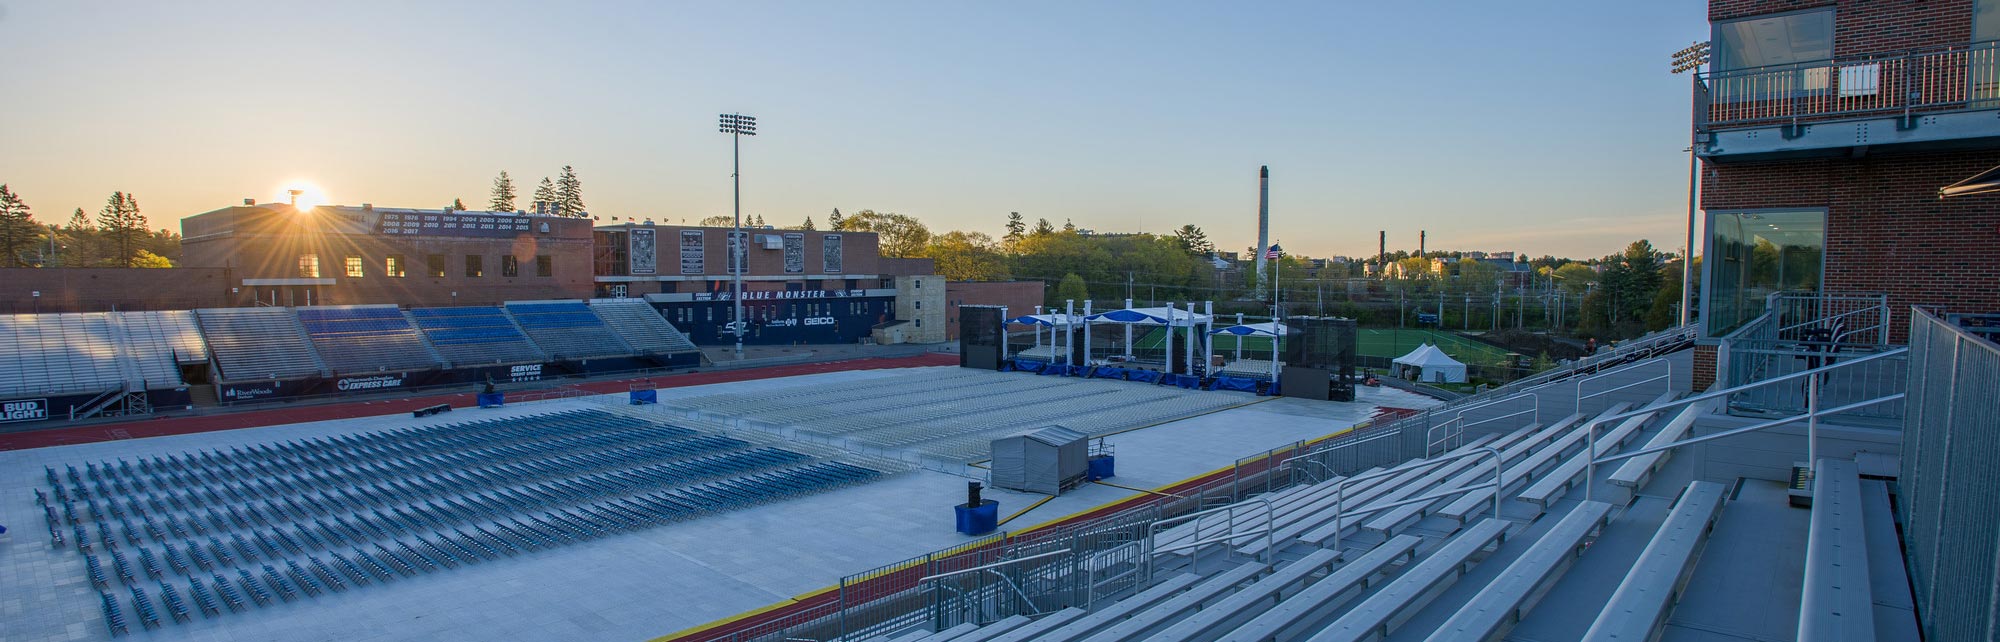 The empty football stadium, prepared for commencement